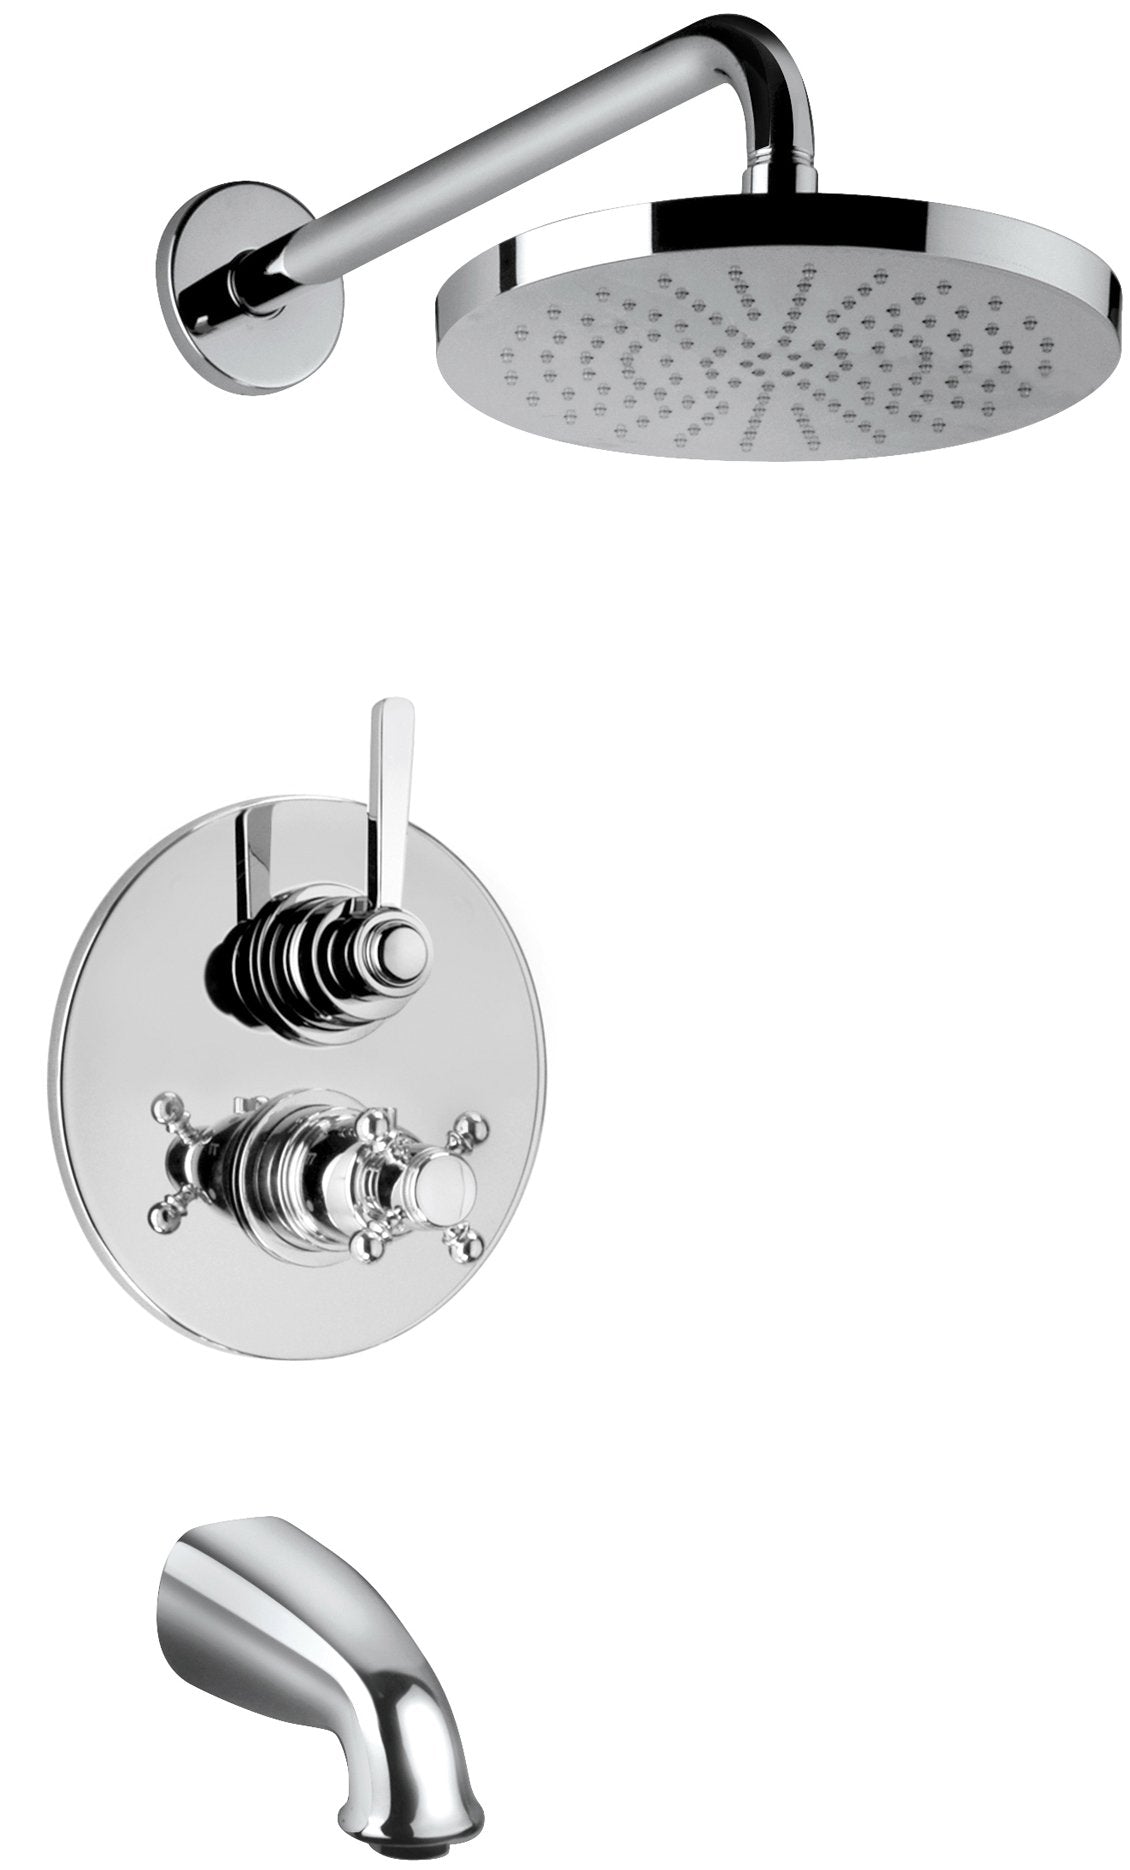 Latoscana Firenze Thermostatic Valve With 2 Way Diverter Volume Control In Brushed Nickel Finish bathtub and showerhead faucet systems Latoscana 